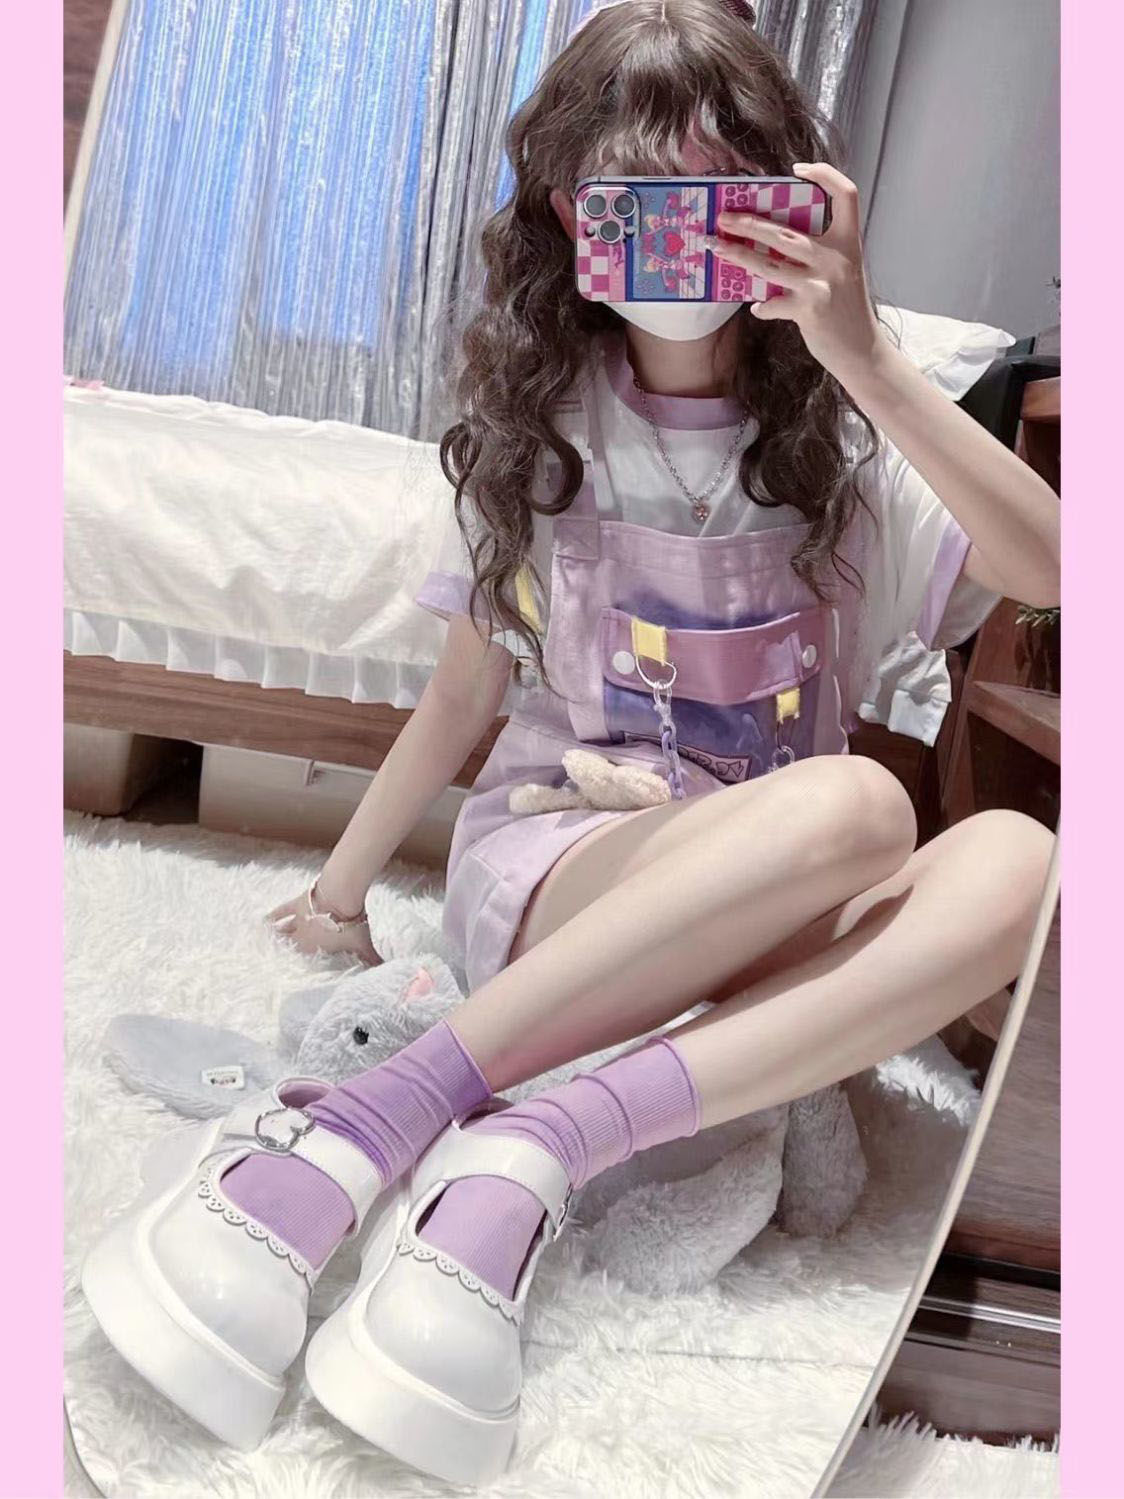 Two-piece suit/one-piece summer dress college style sweet suspenders casual pants short pants fried street all-match short-sleeved T-shirt female